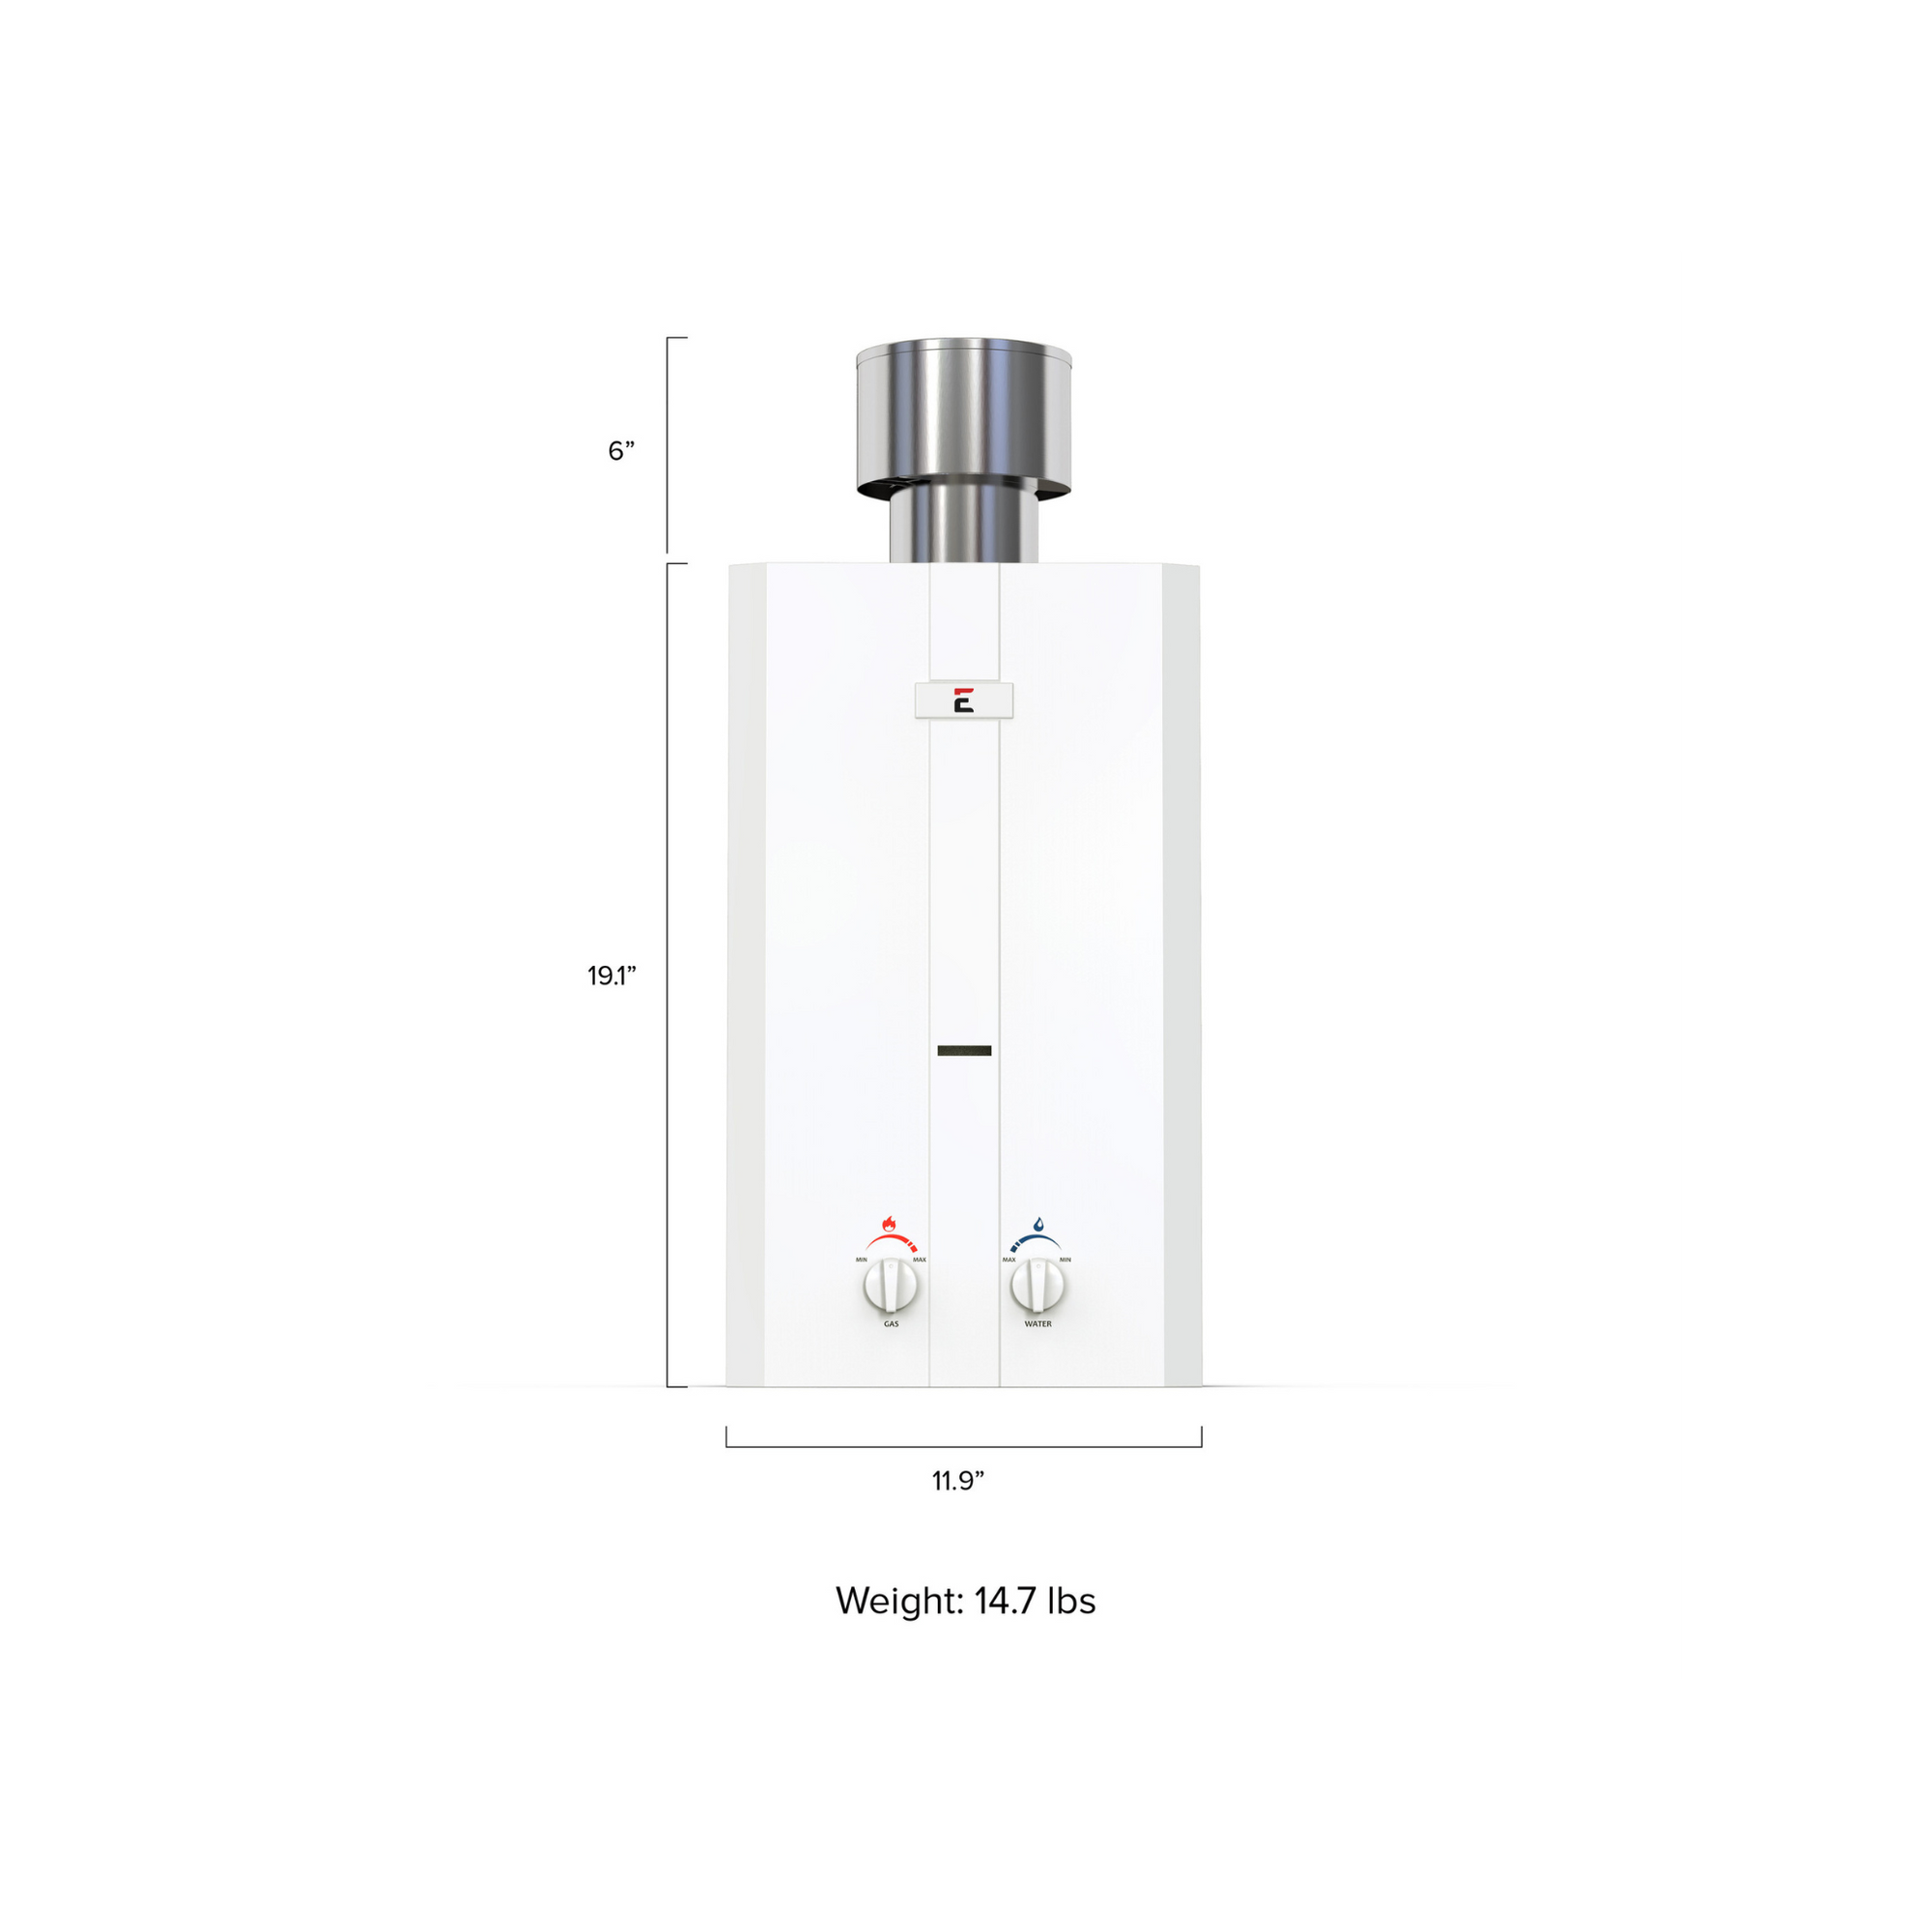 Eccotemp L10 Portable Outdoor Tankless Water Heater with Shower Set